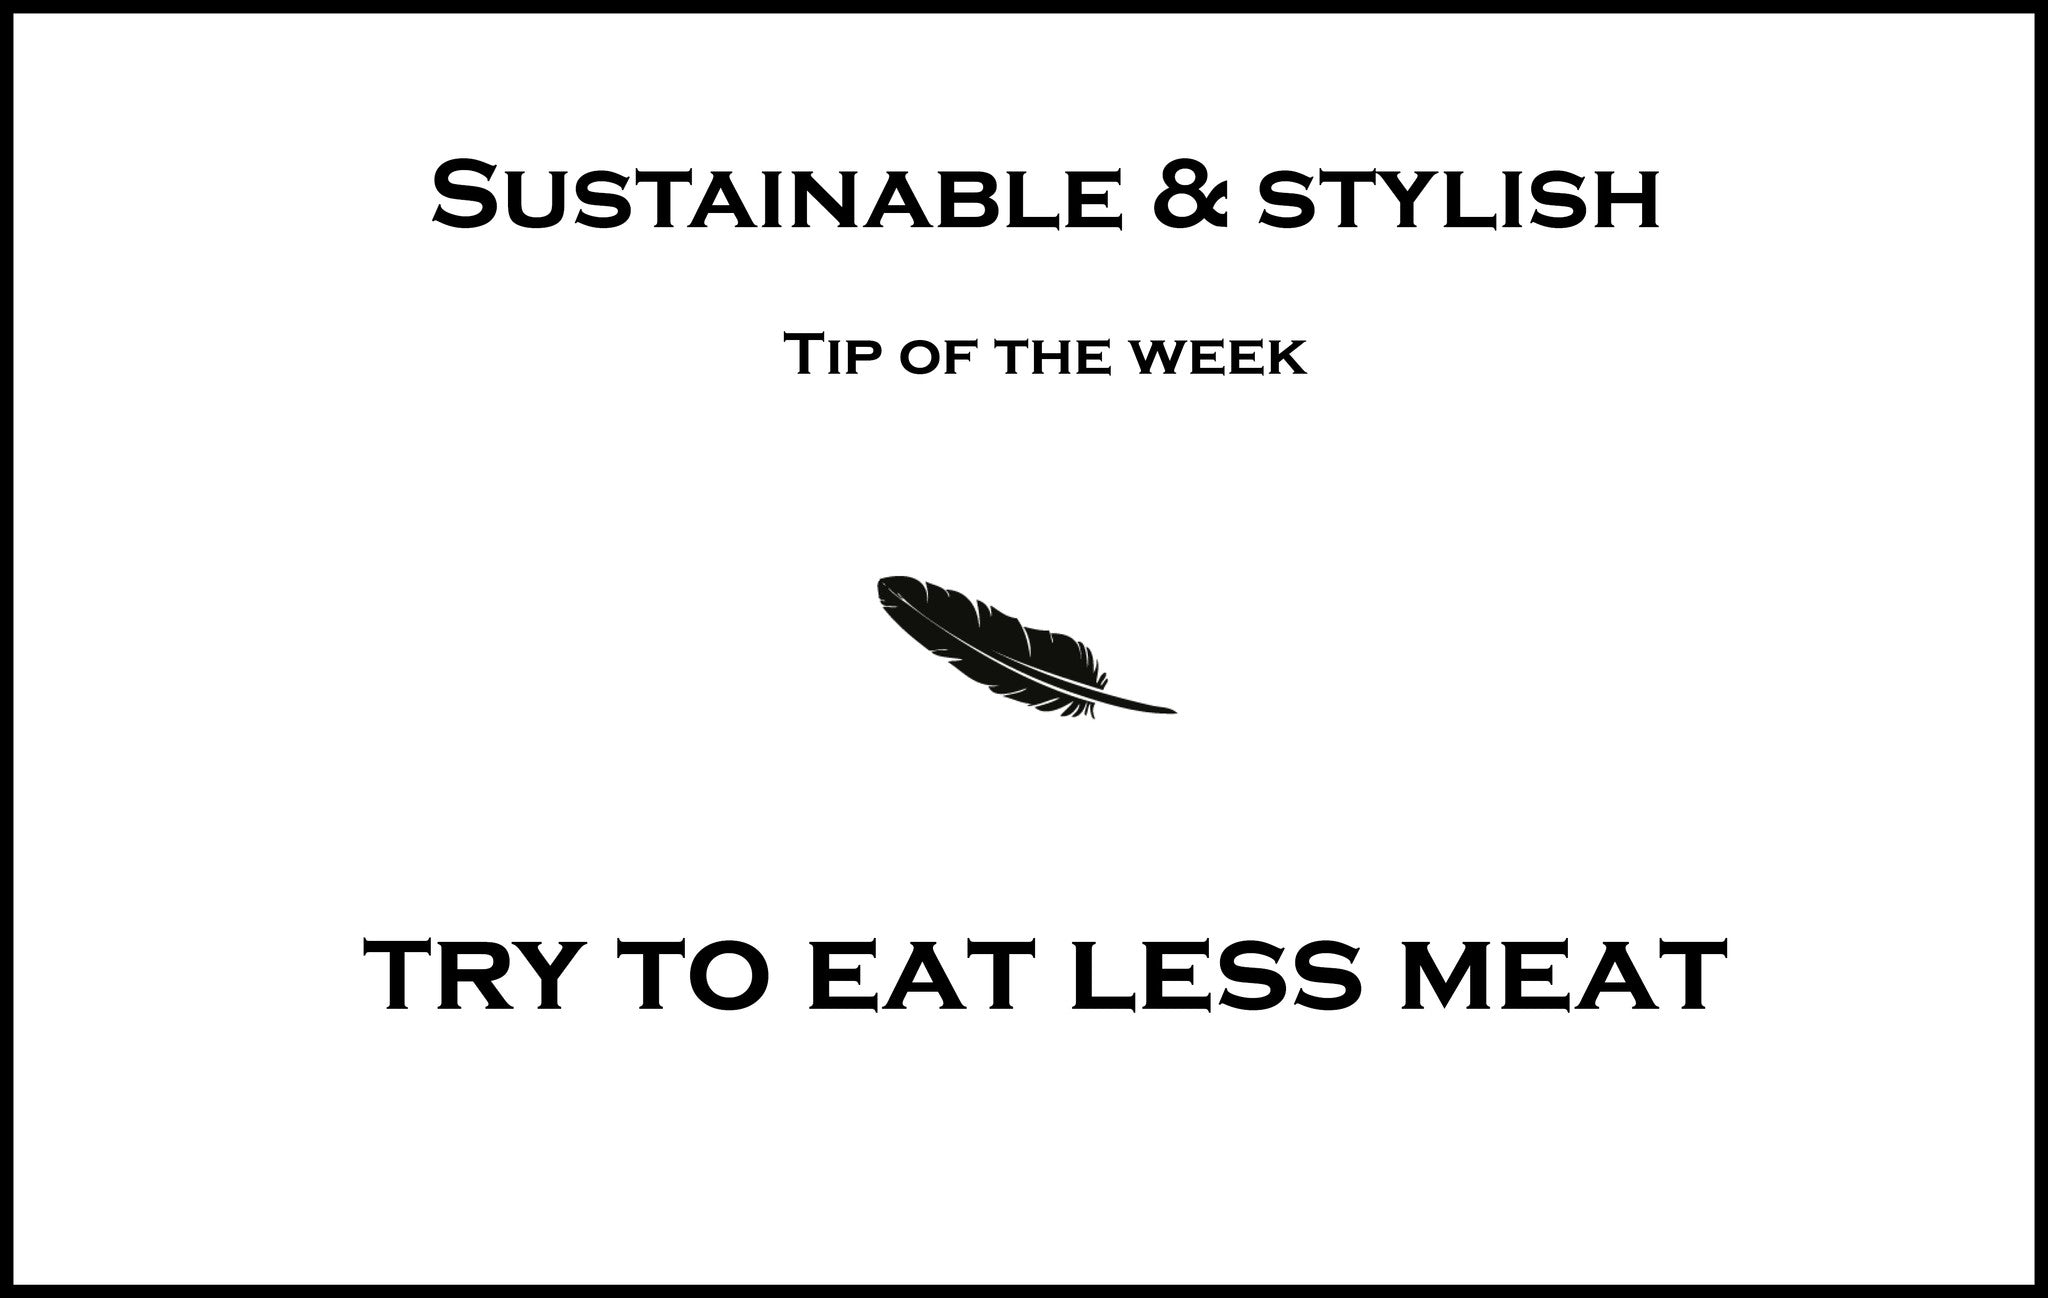 Try to eat less meat